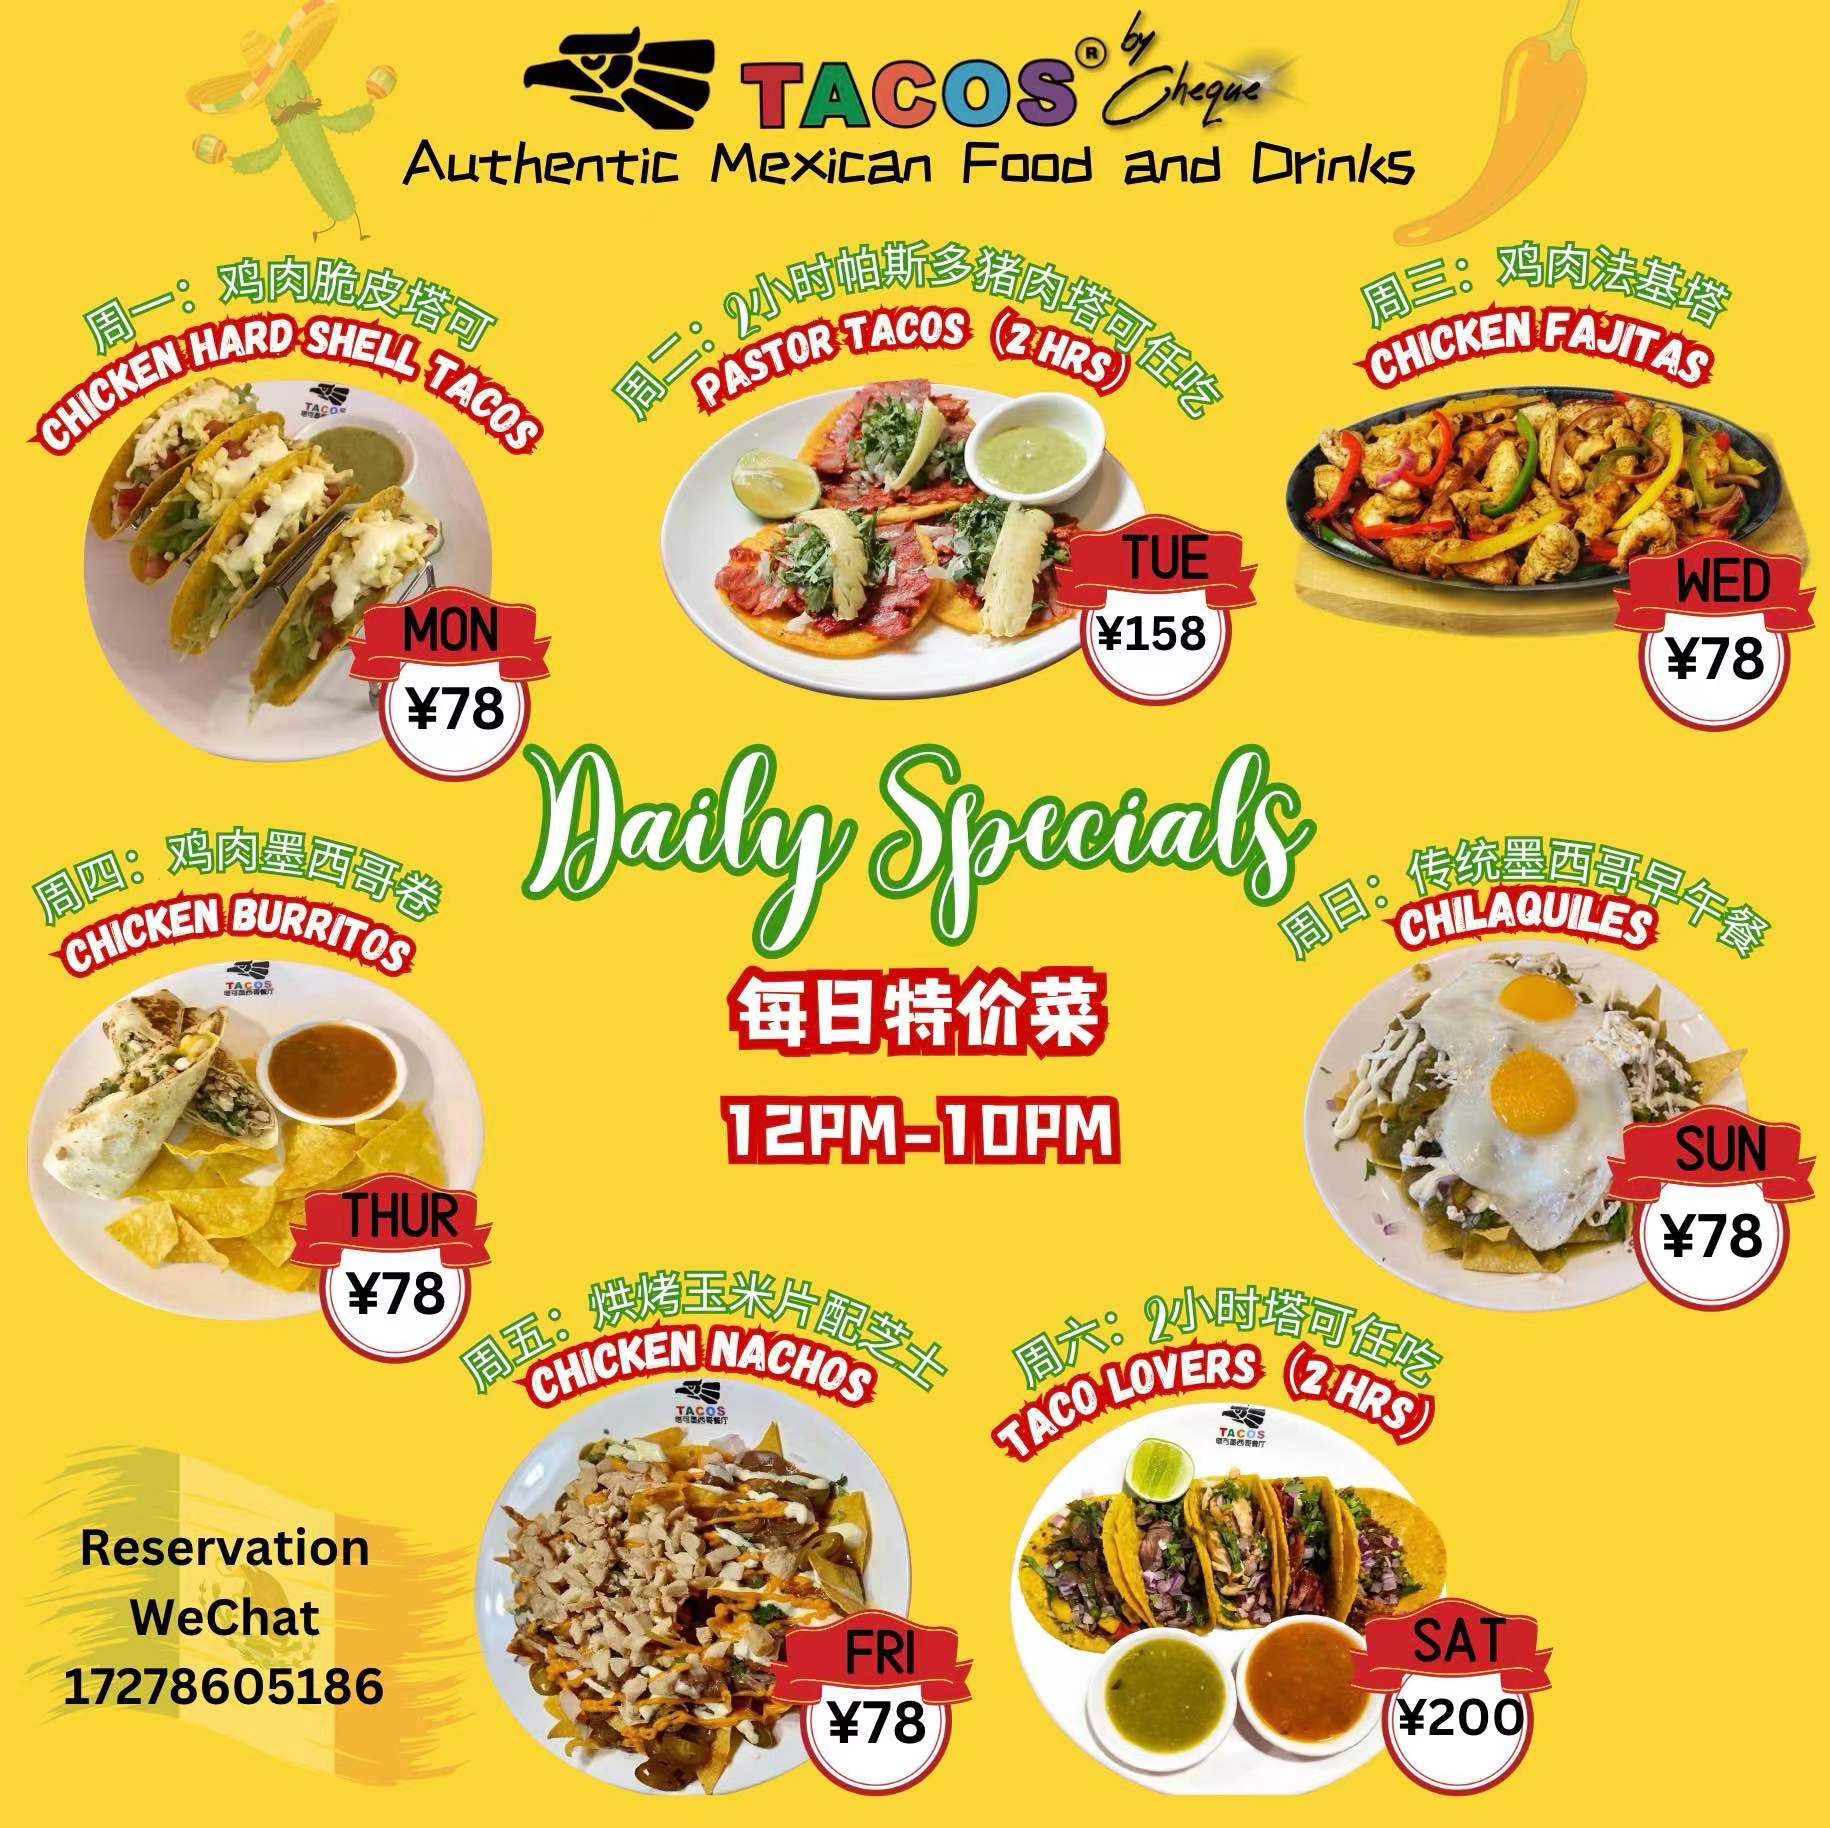 Daily-Special-Deals-at-TACOS-by-Cheque-GZ.jpg